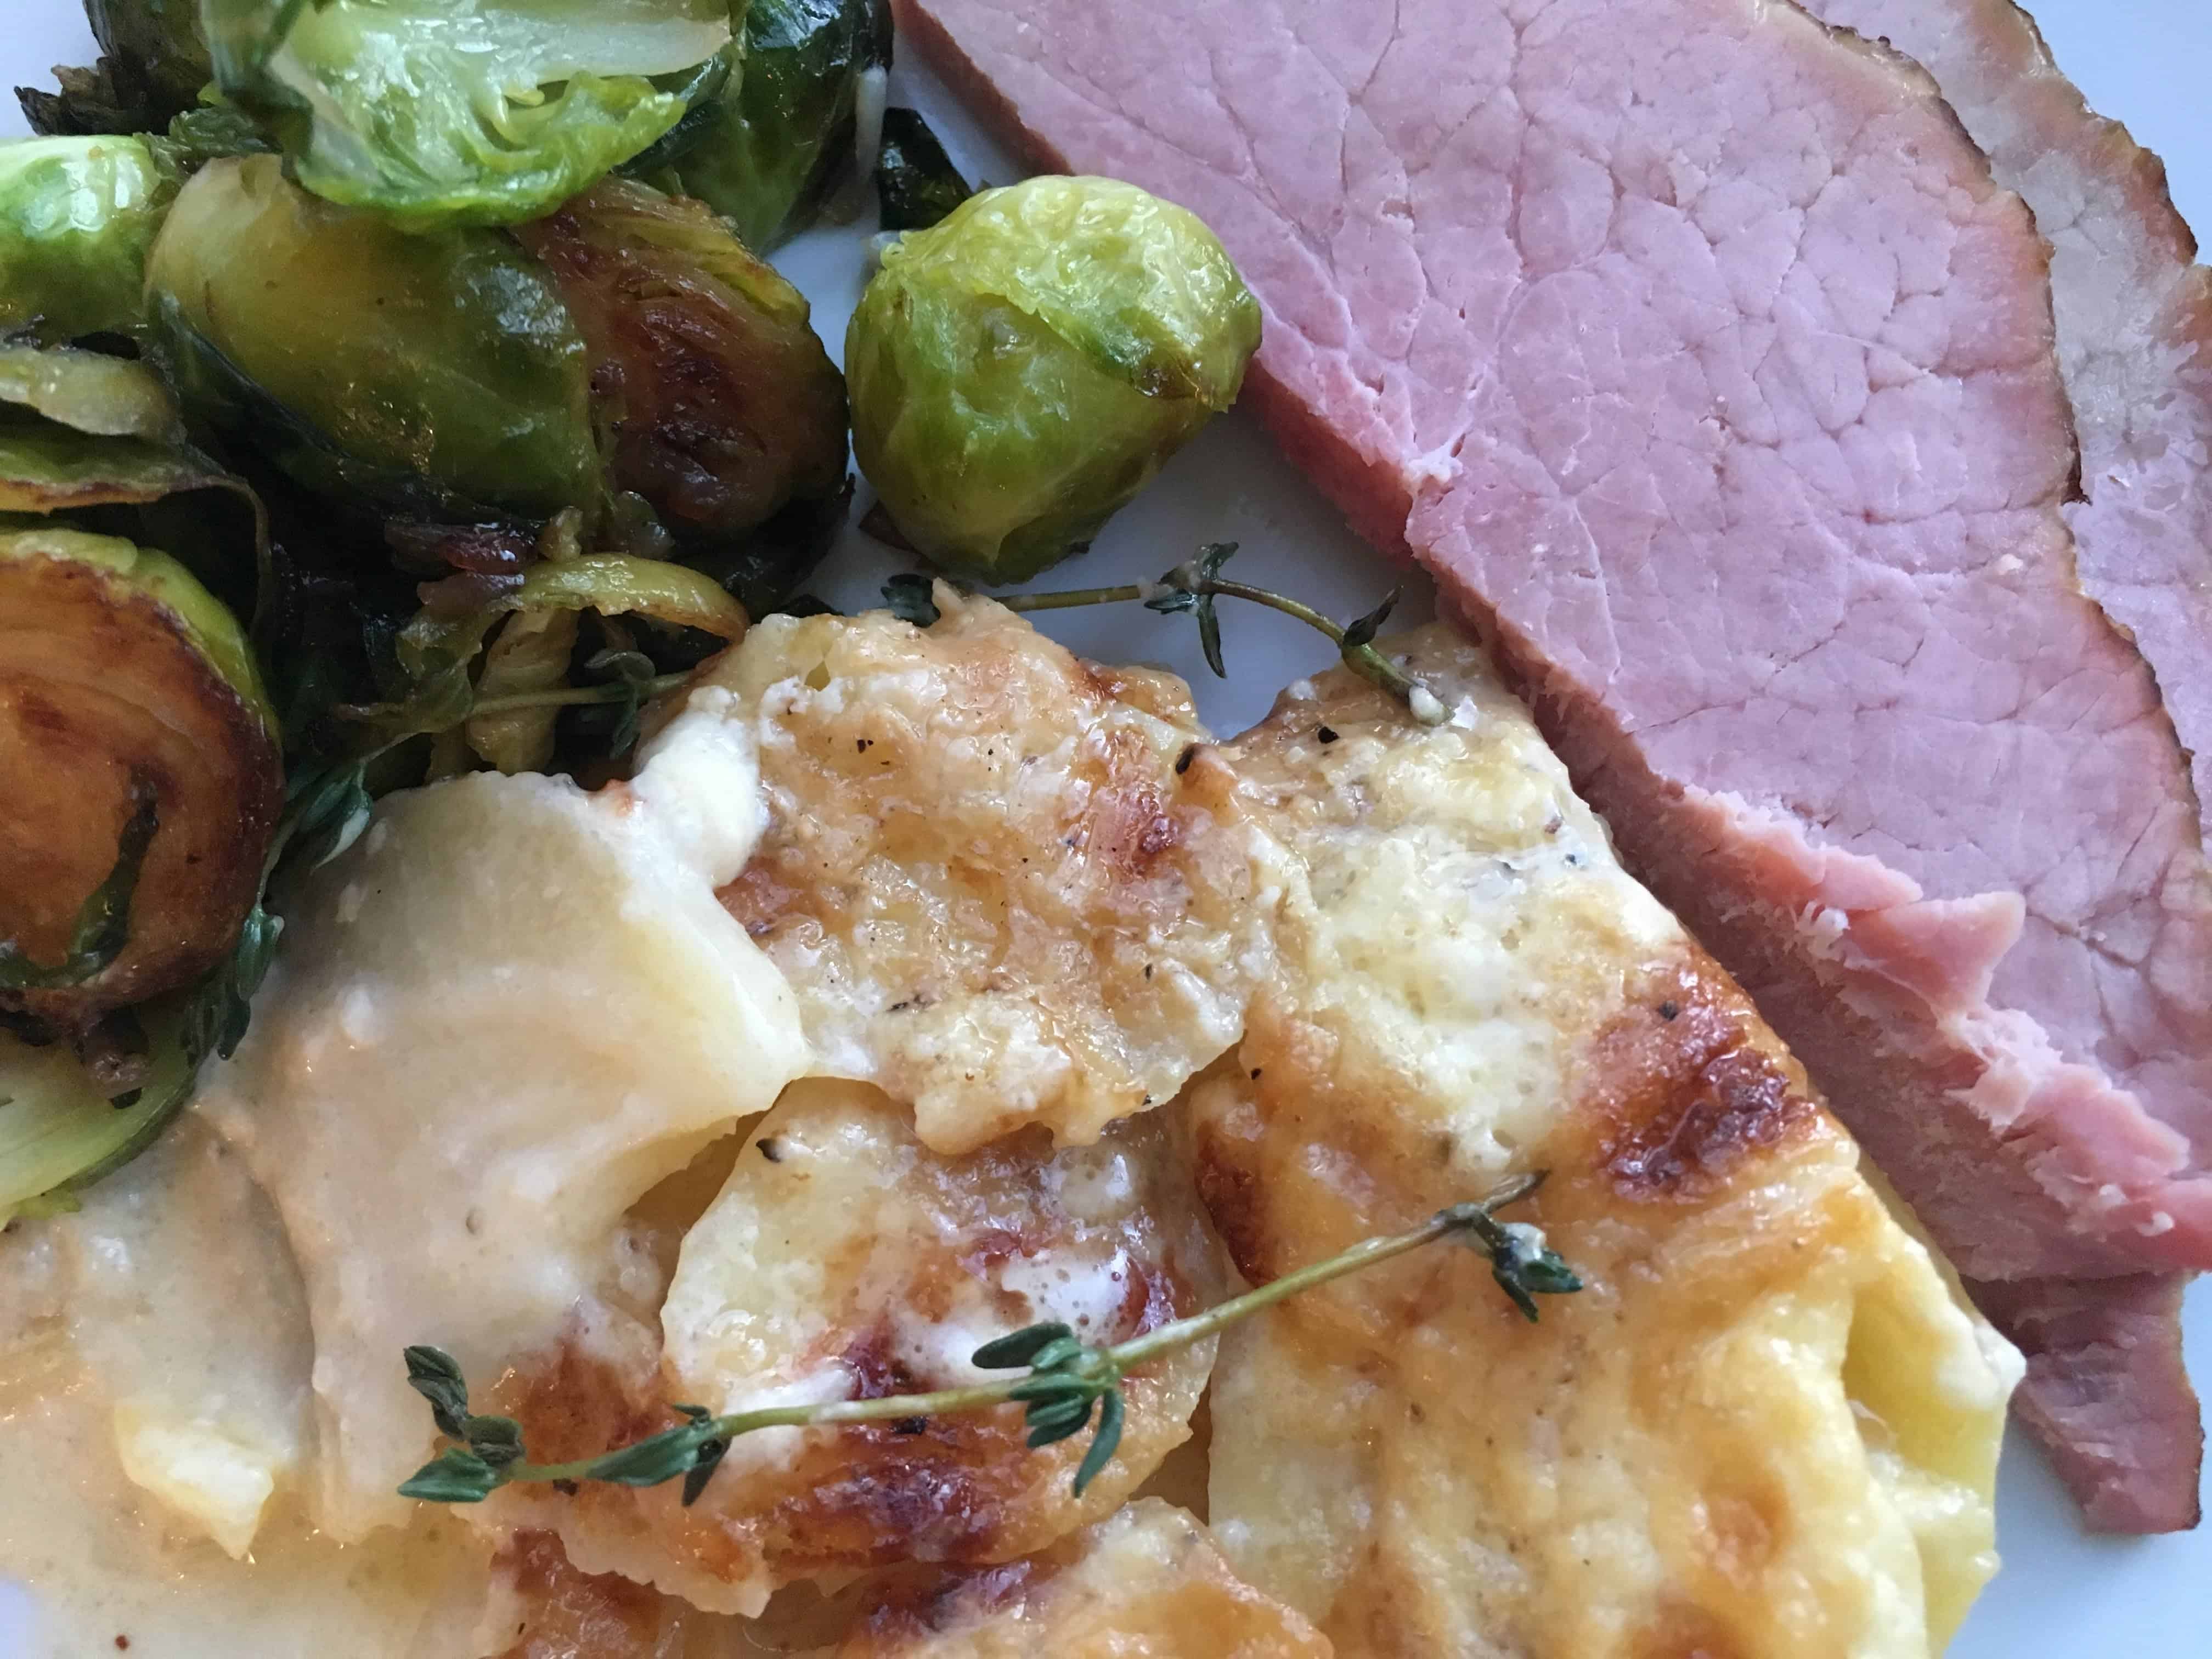 Potatoes Au Gratin with ham and brussels sprouts